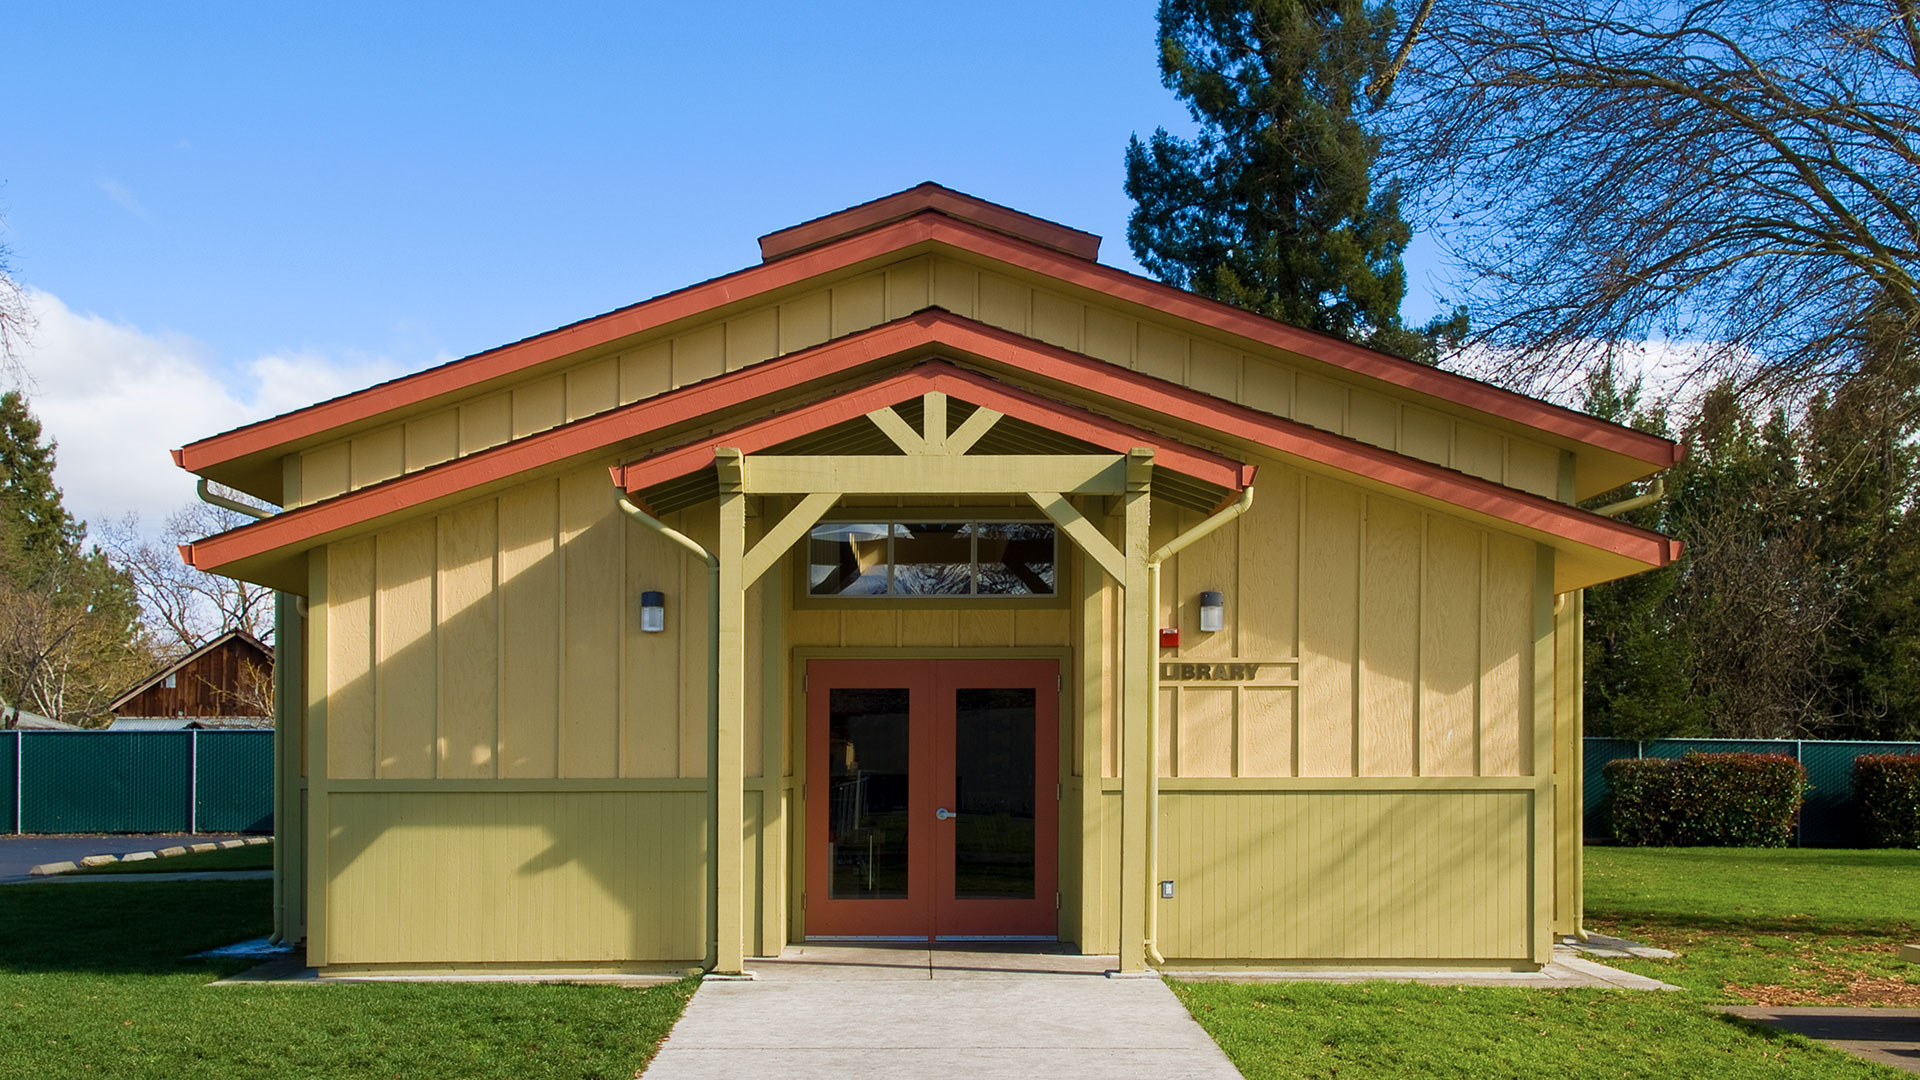 Library building entrance with yellow walls and light green wainscot, and orange doors.